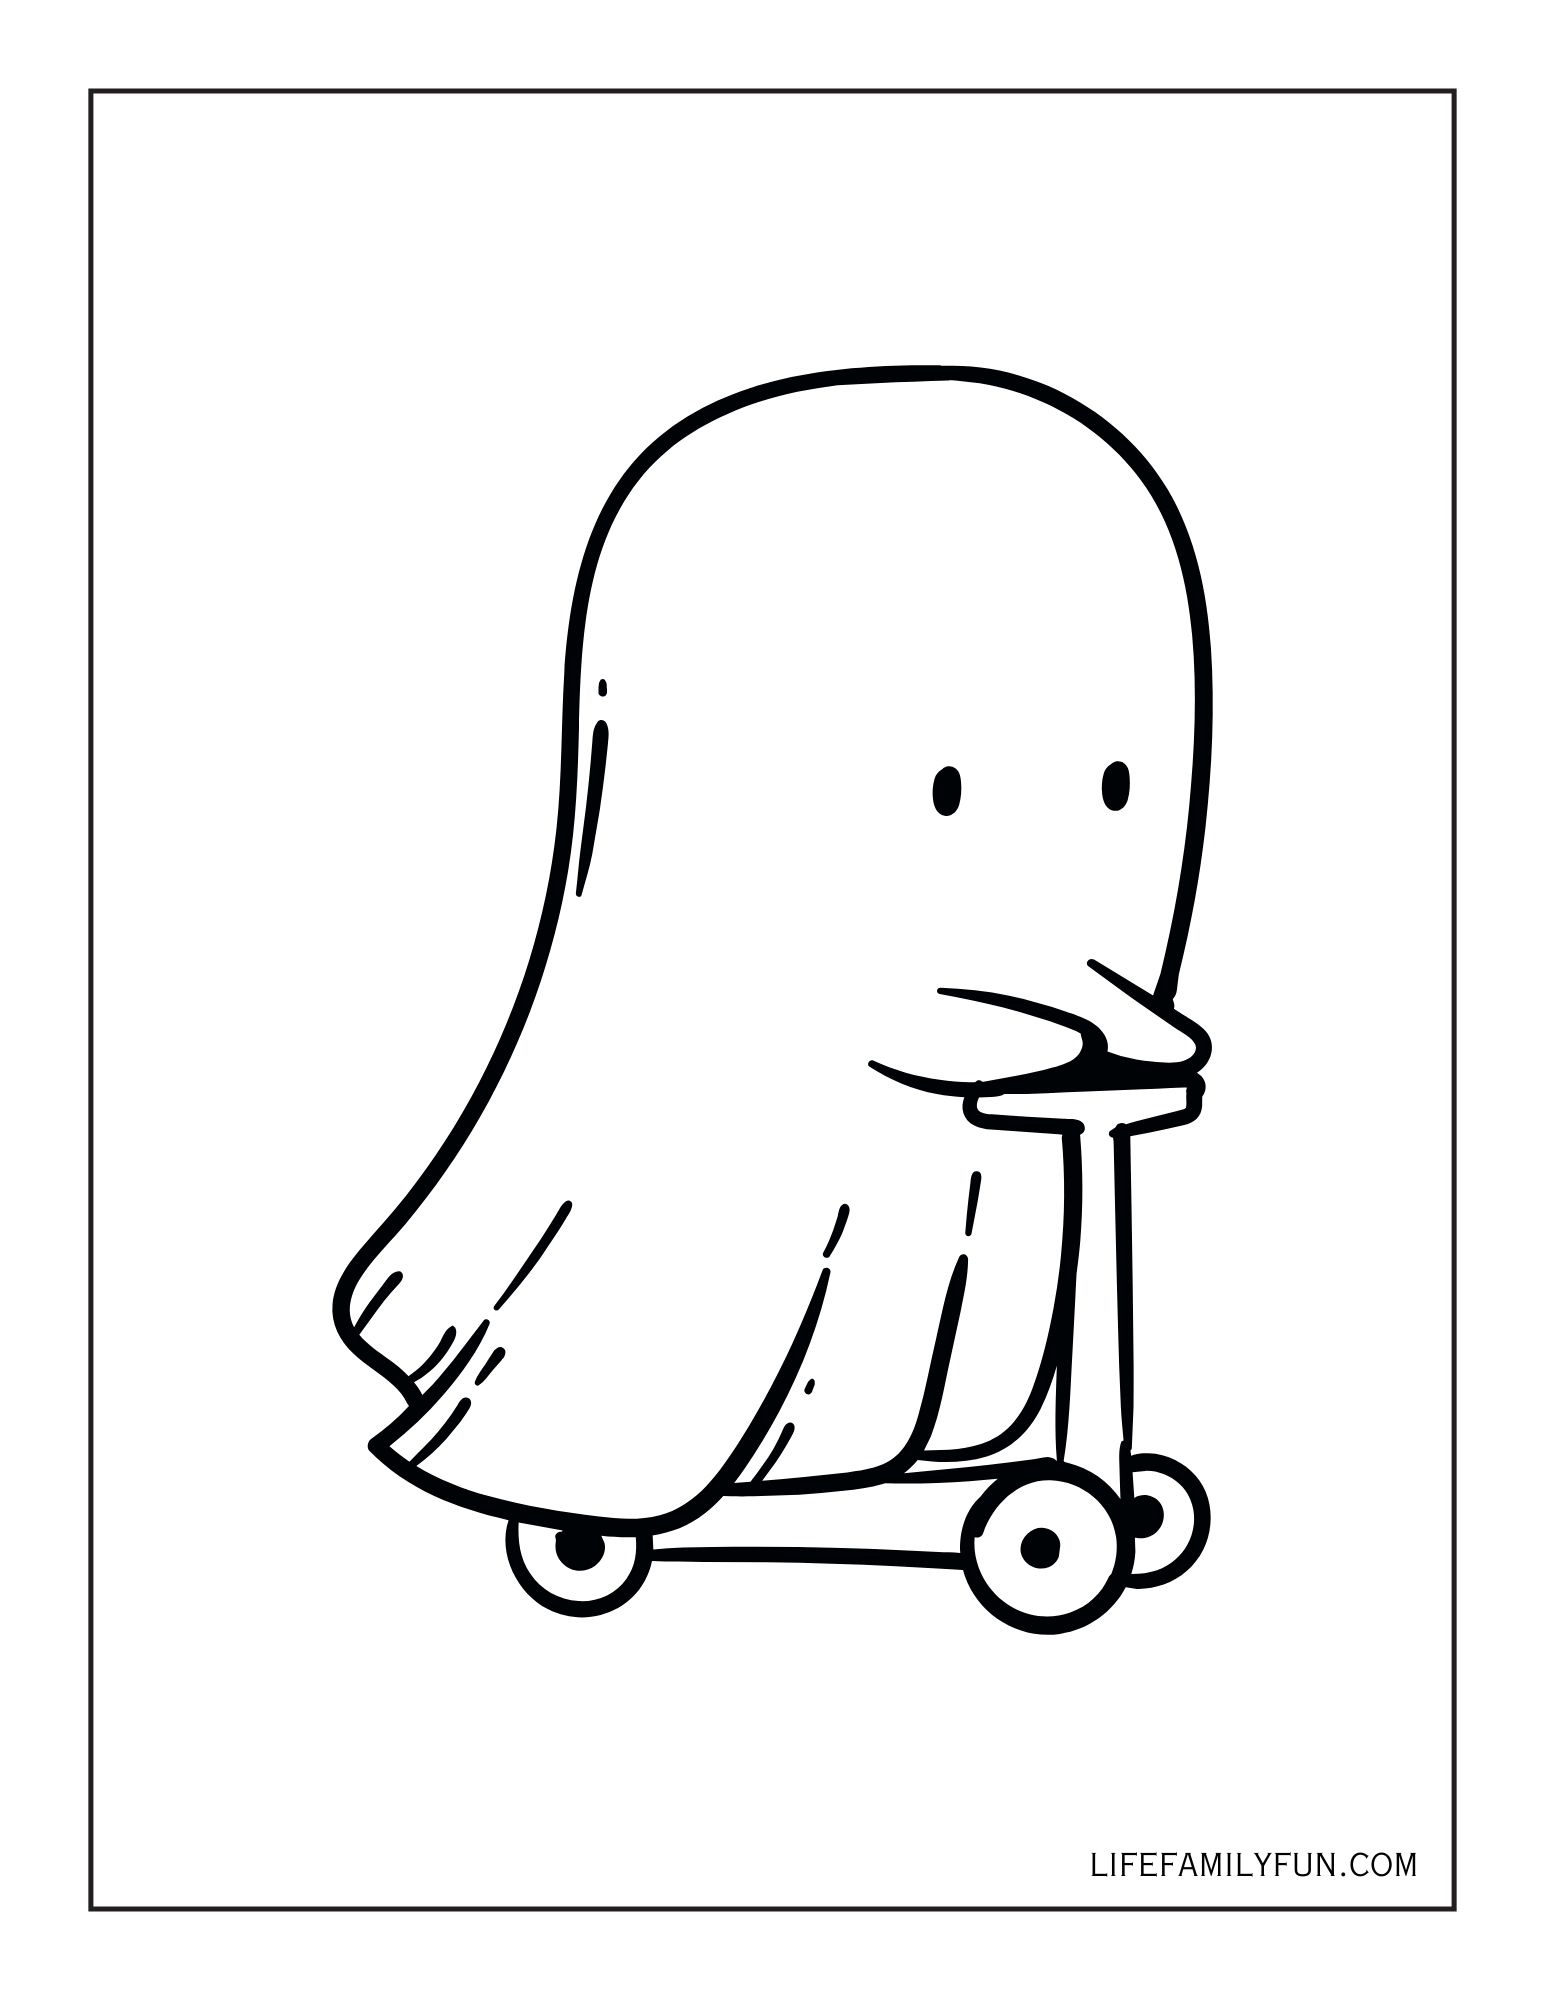 Funny ghosty when wheels coloring page